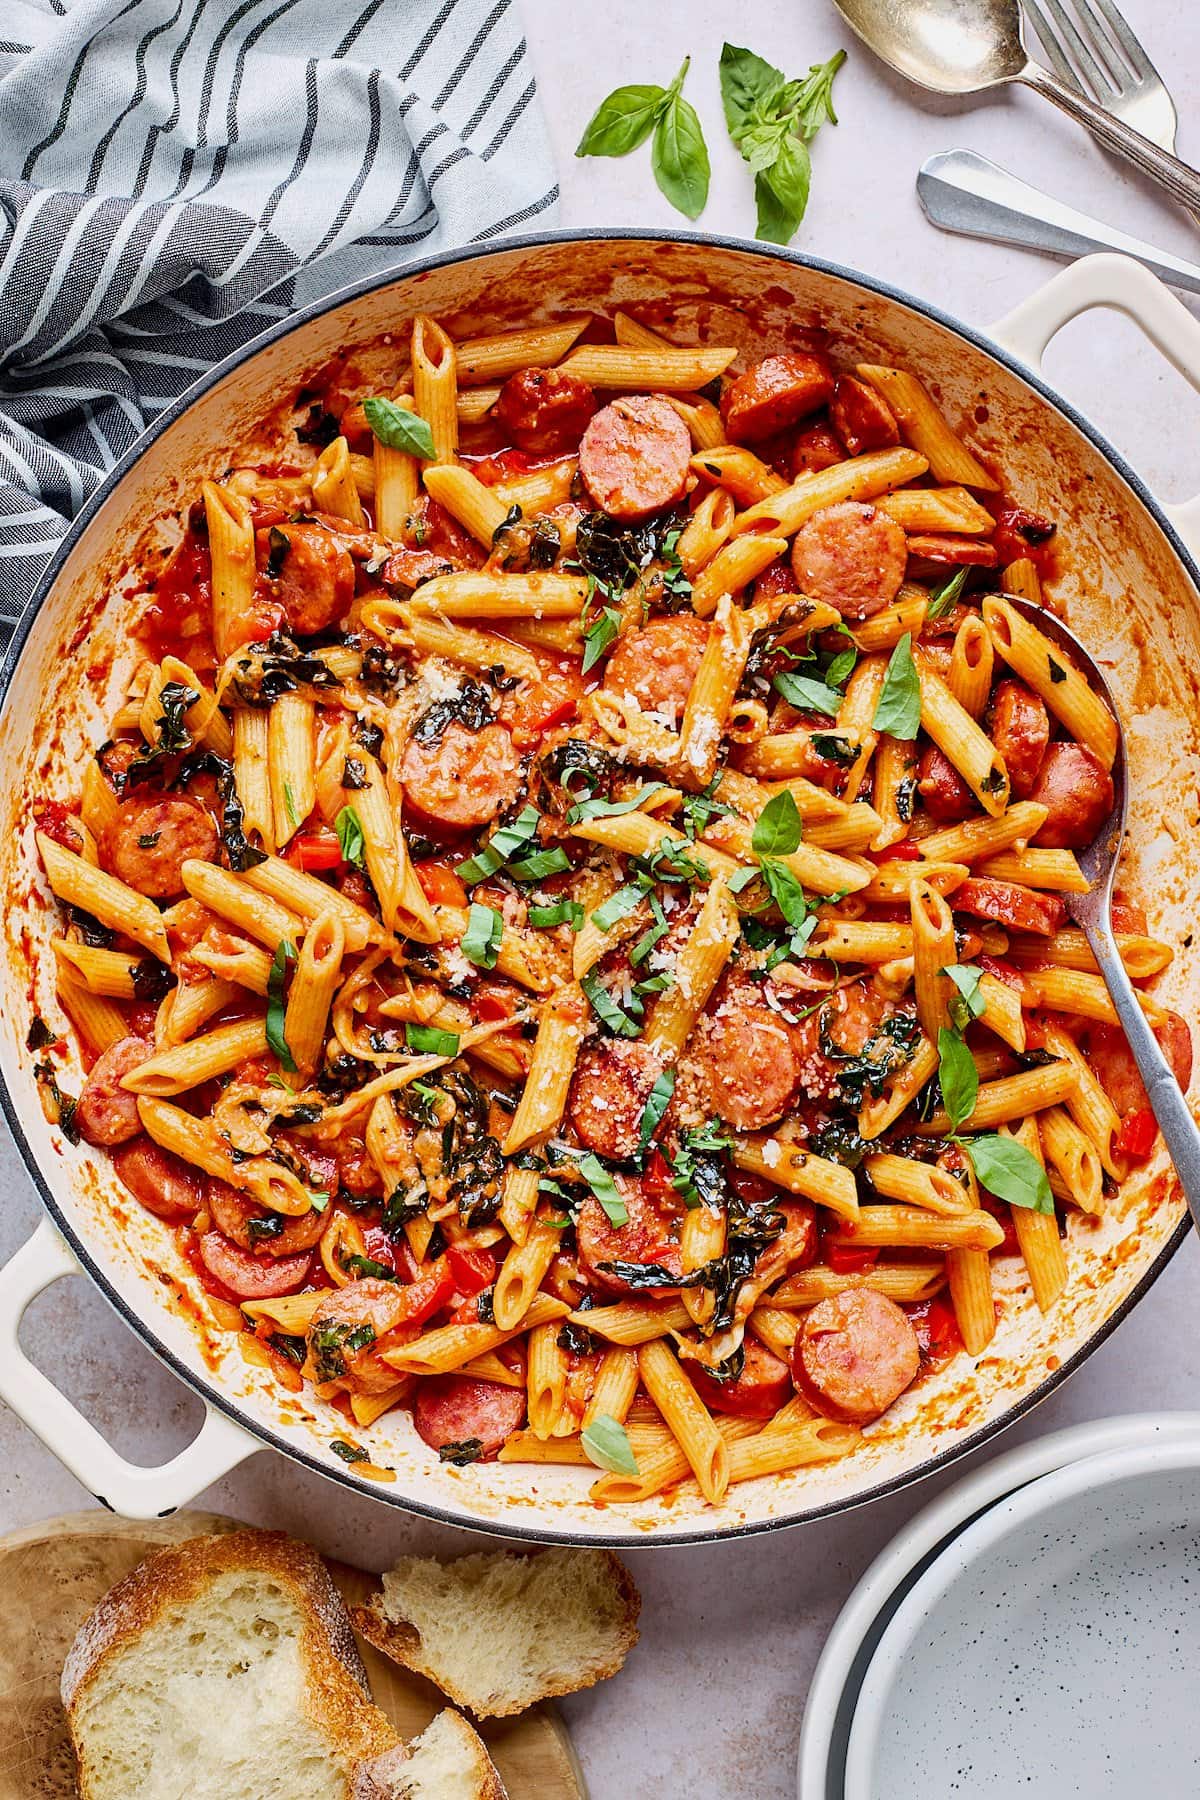 How to Make One-Pot Pasta With Practically Any Pasta - The New